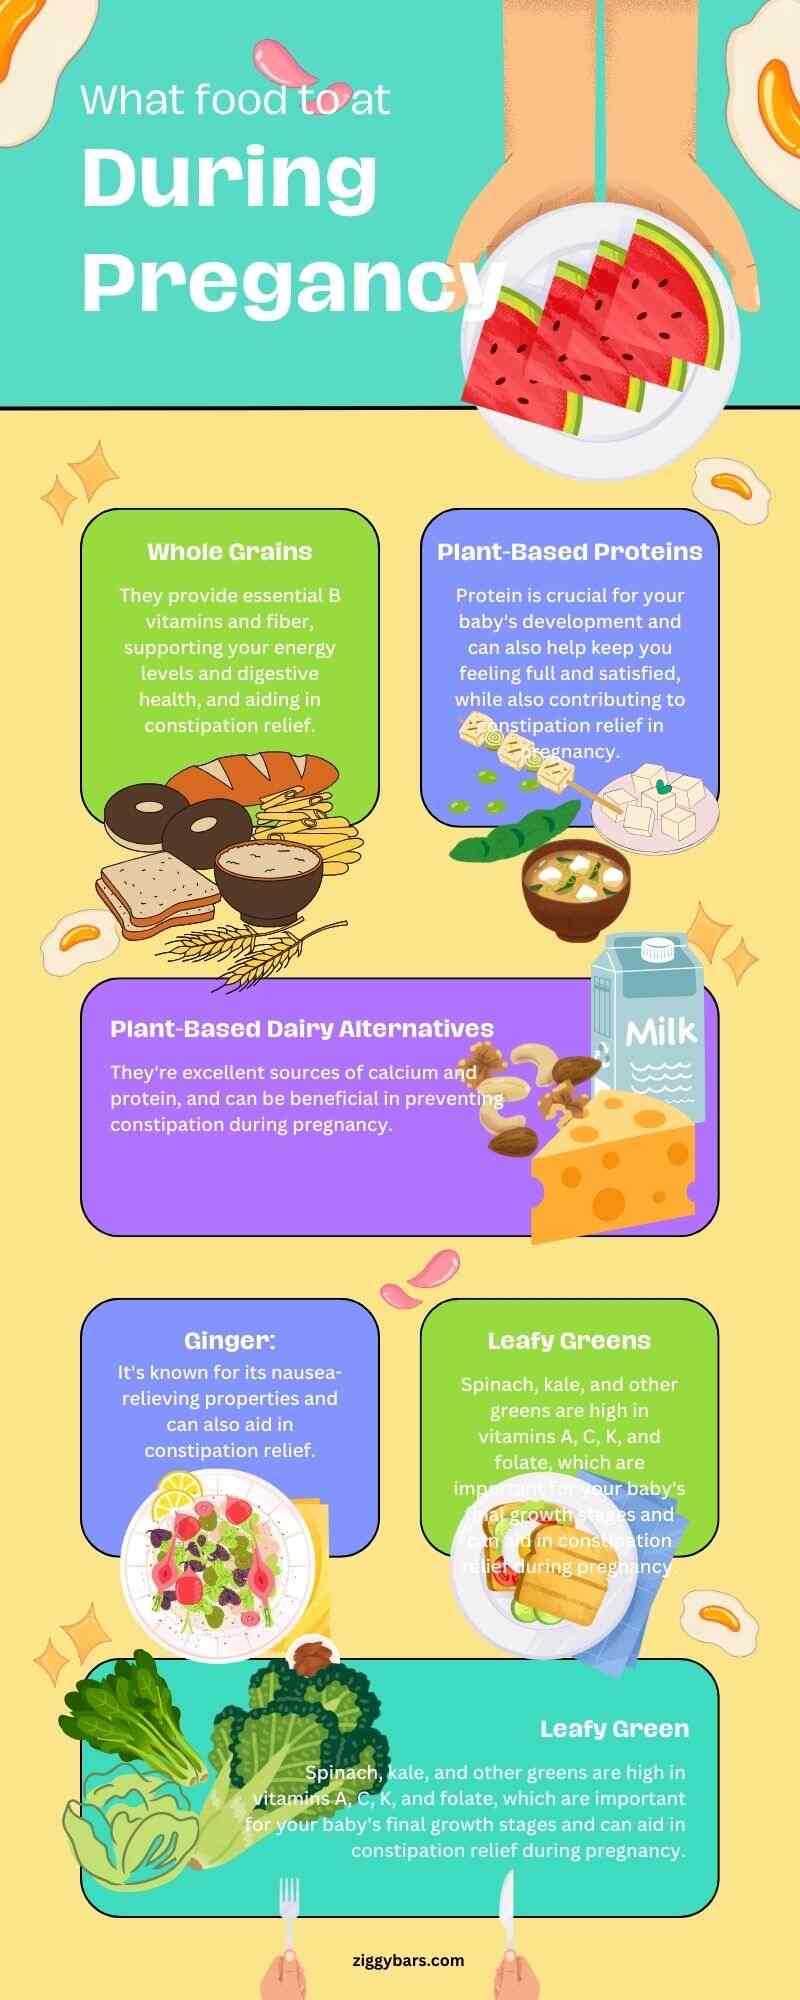 What Foods to Eat During Pregnancy